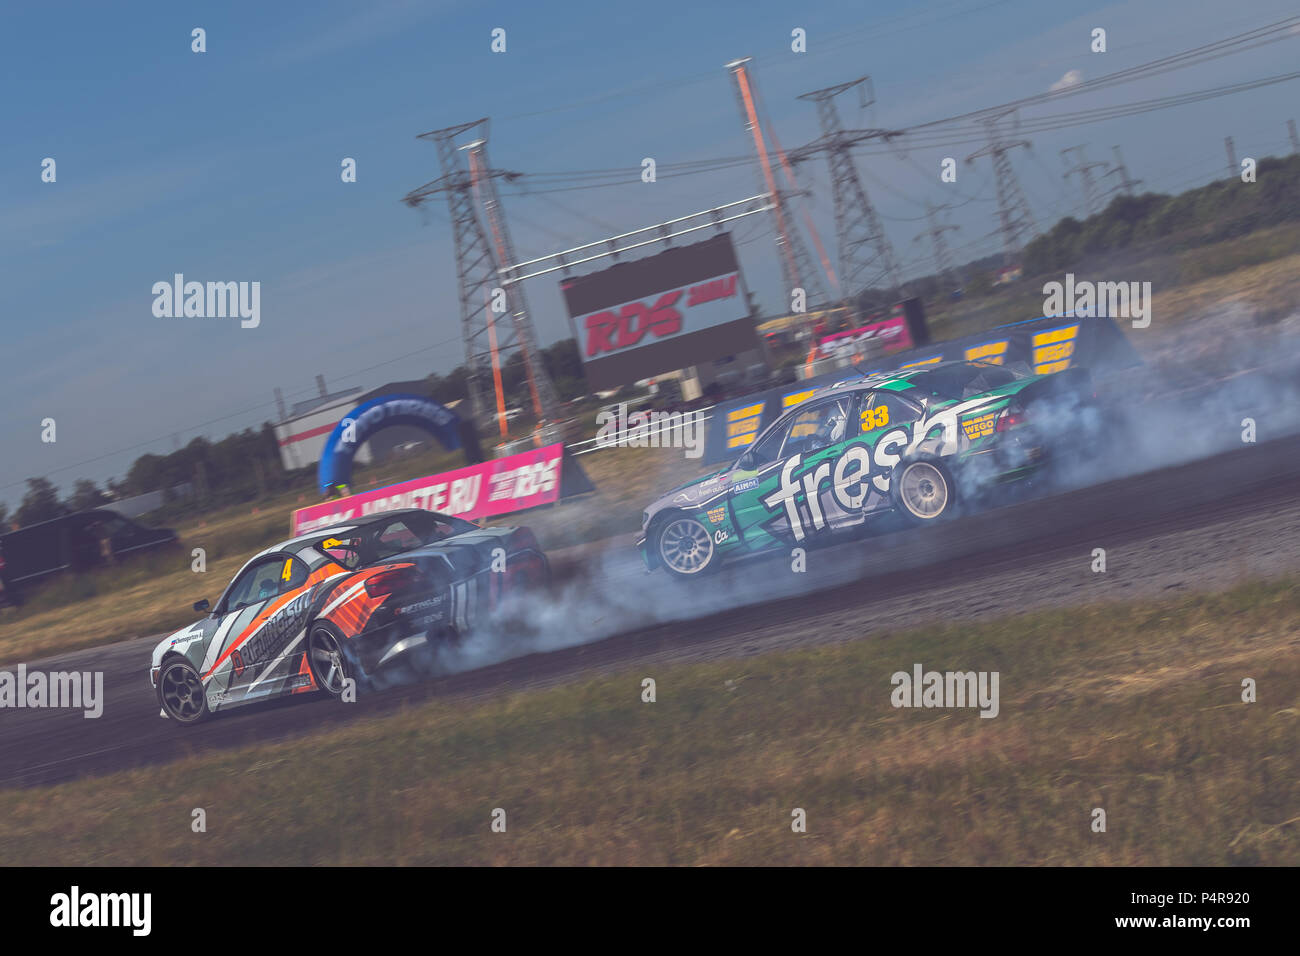 AutodromSpb, Saint-Petersburg, Russia - August 16, 2018: Powerful race car drifting on speed track during First Stage of Russian Drift Series West Stock Photo